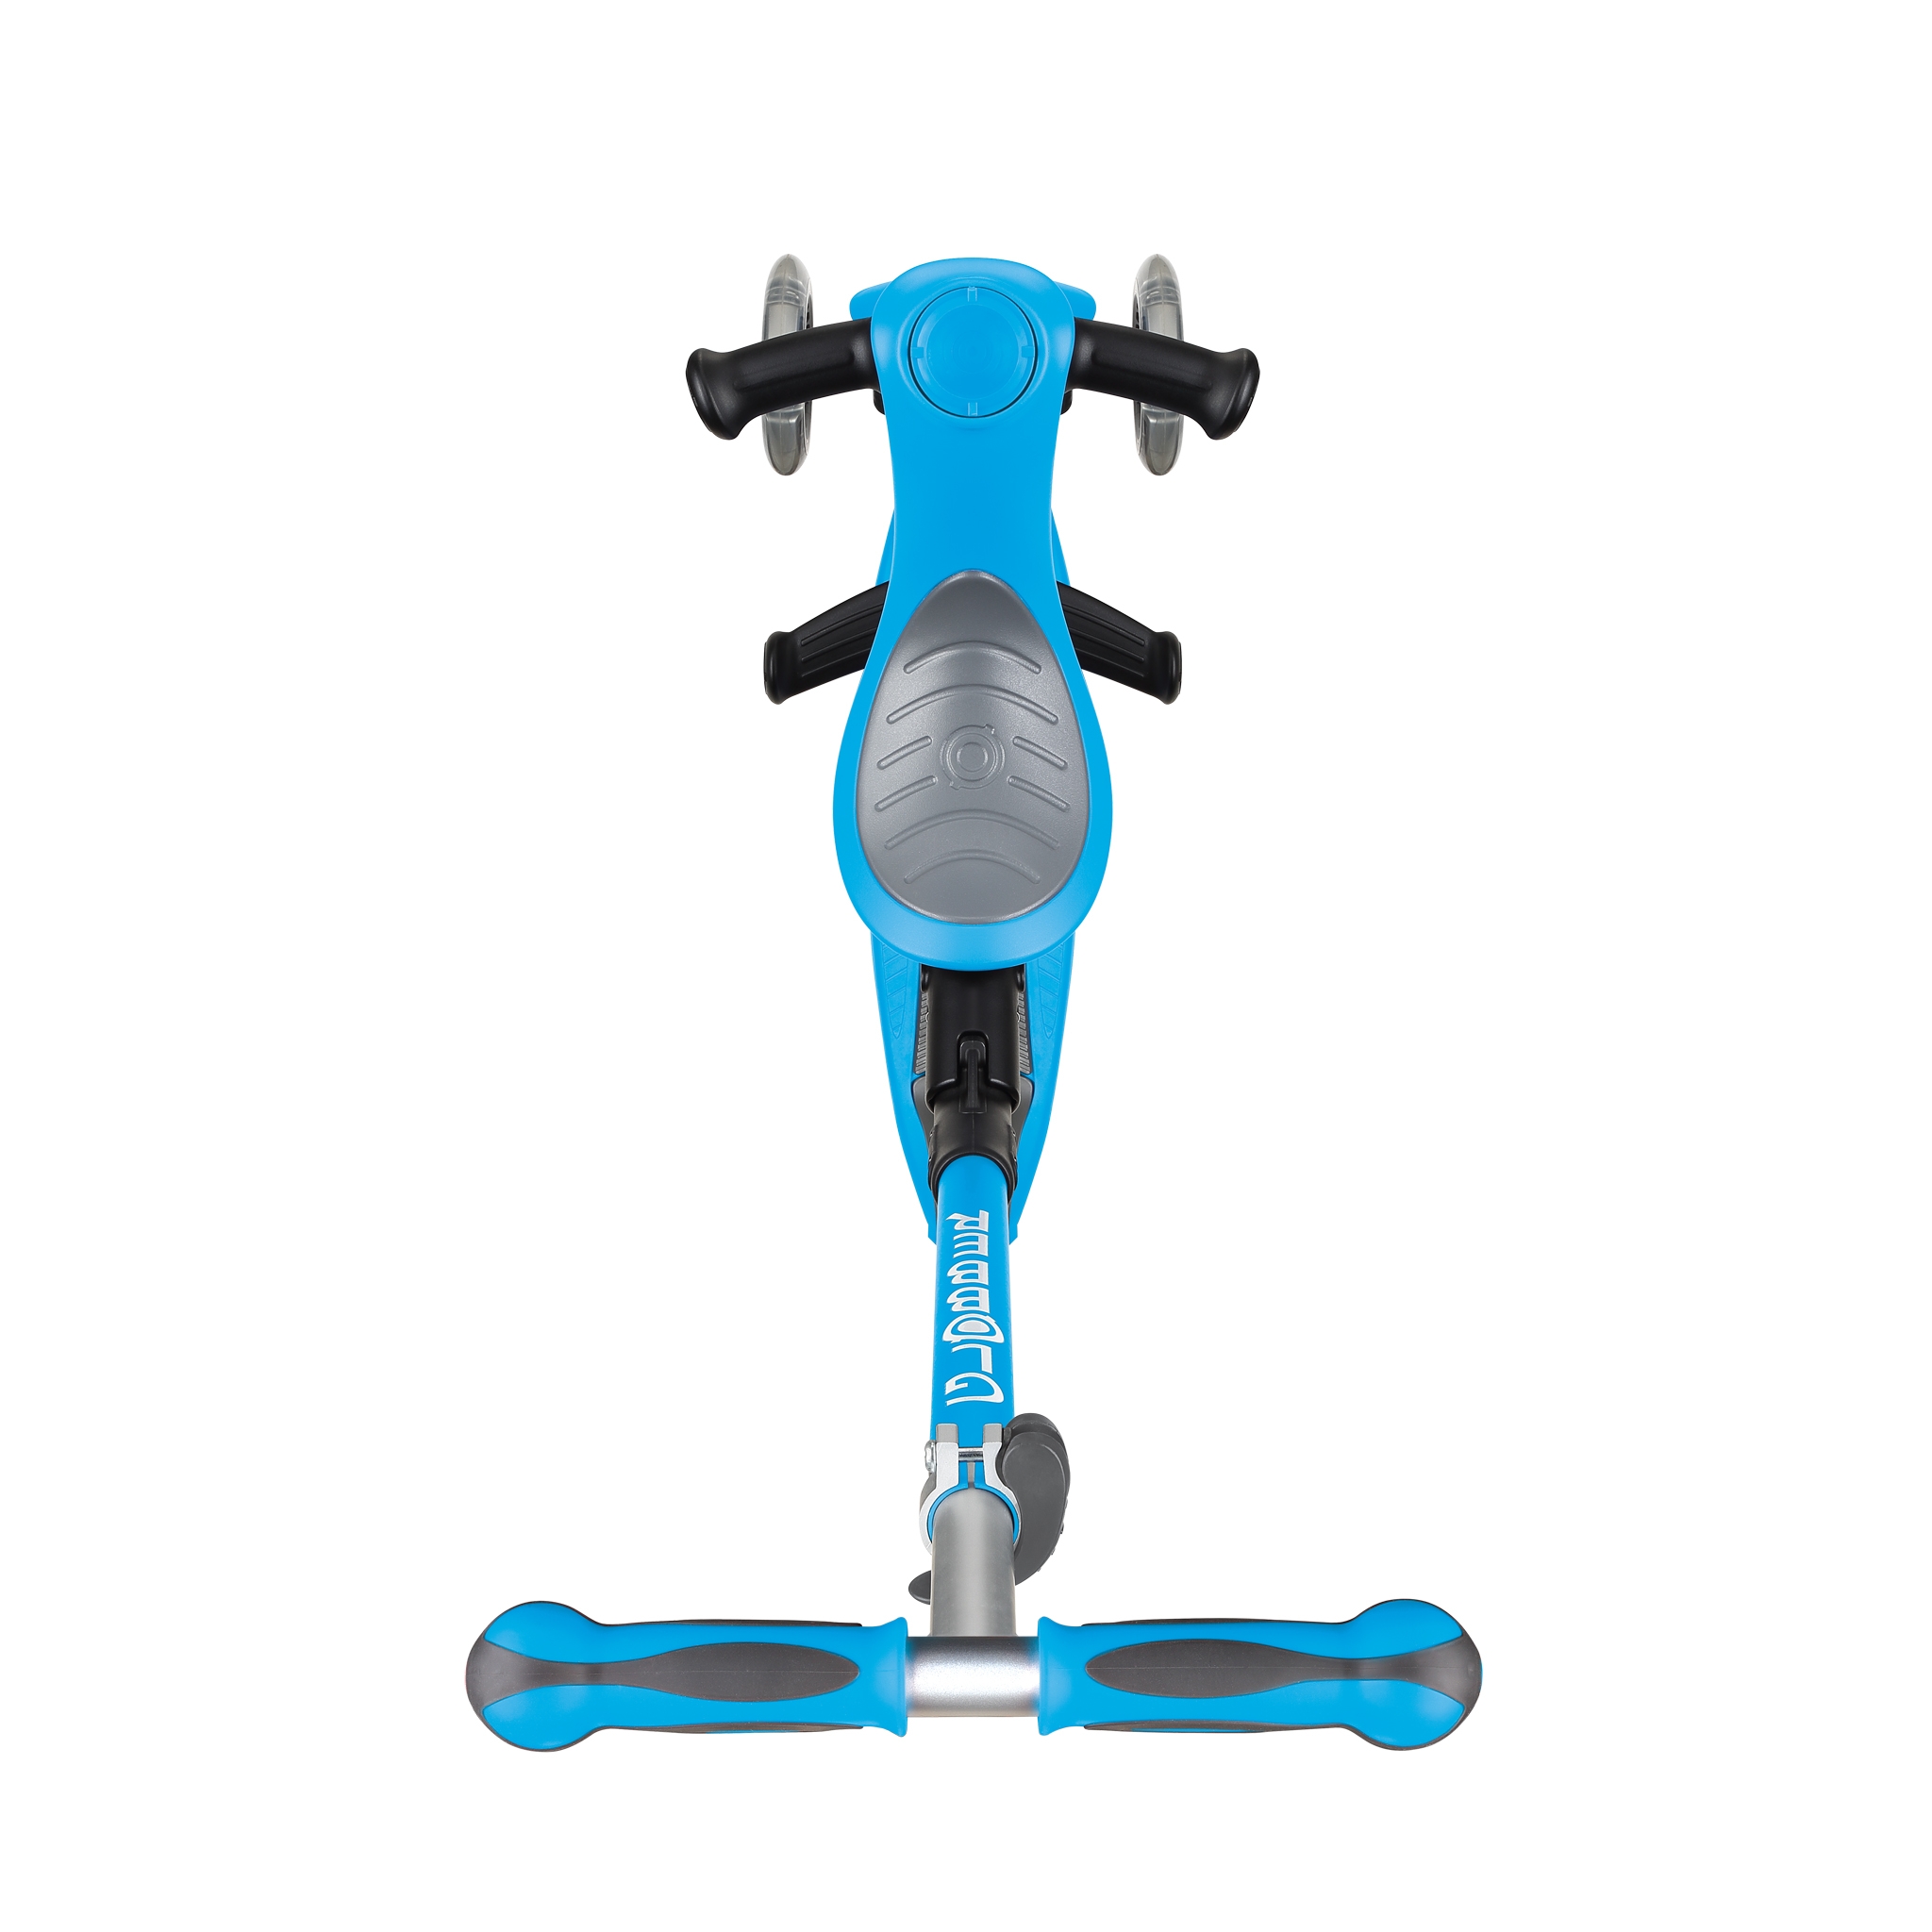 GO-UP-DELUXE-ride-on-walking-bike-scooter-with-extra-wide-3-height-adjustable-seat-sky-blue 2